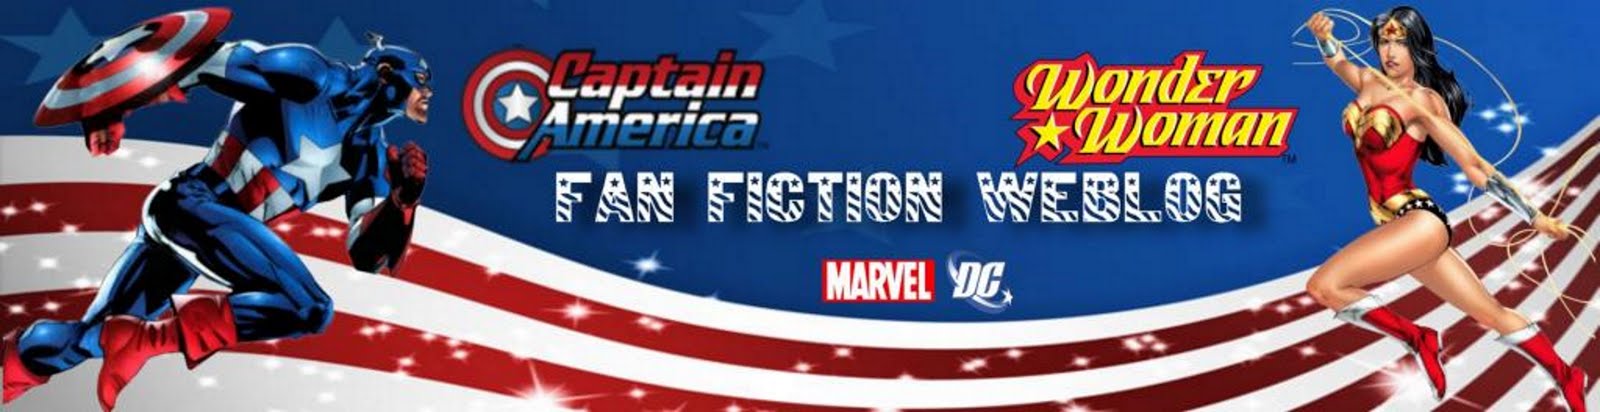 Captain America and Wonder Woman Fanfiction